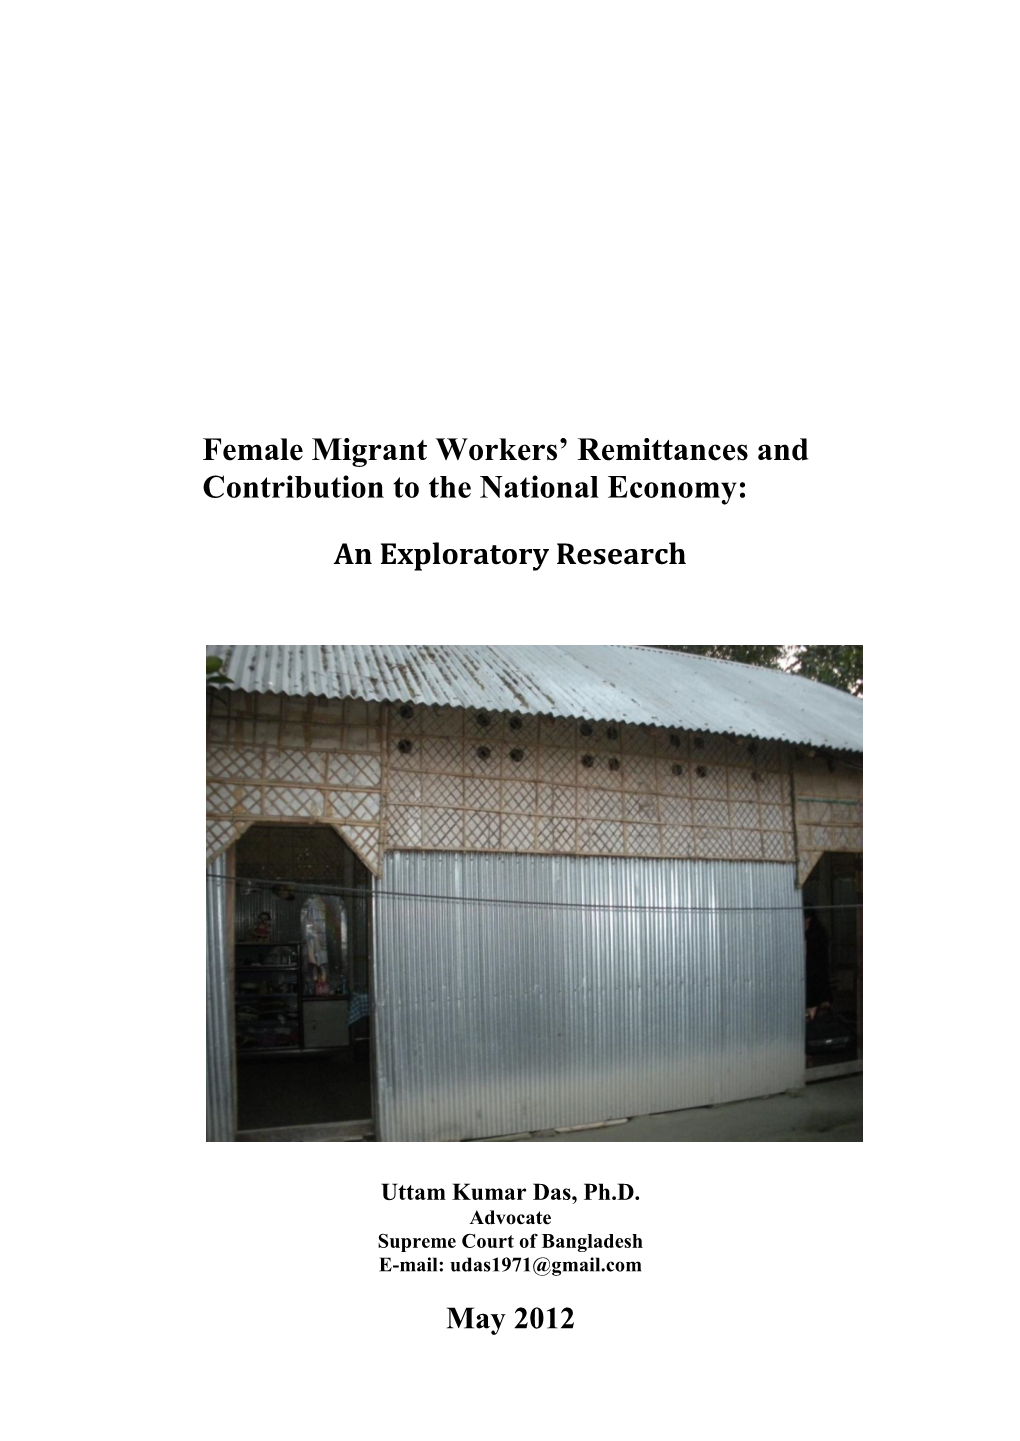 Female Migrant Workers' Remittances and Contribution to the National